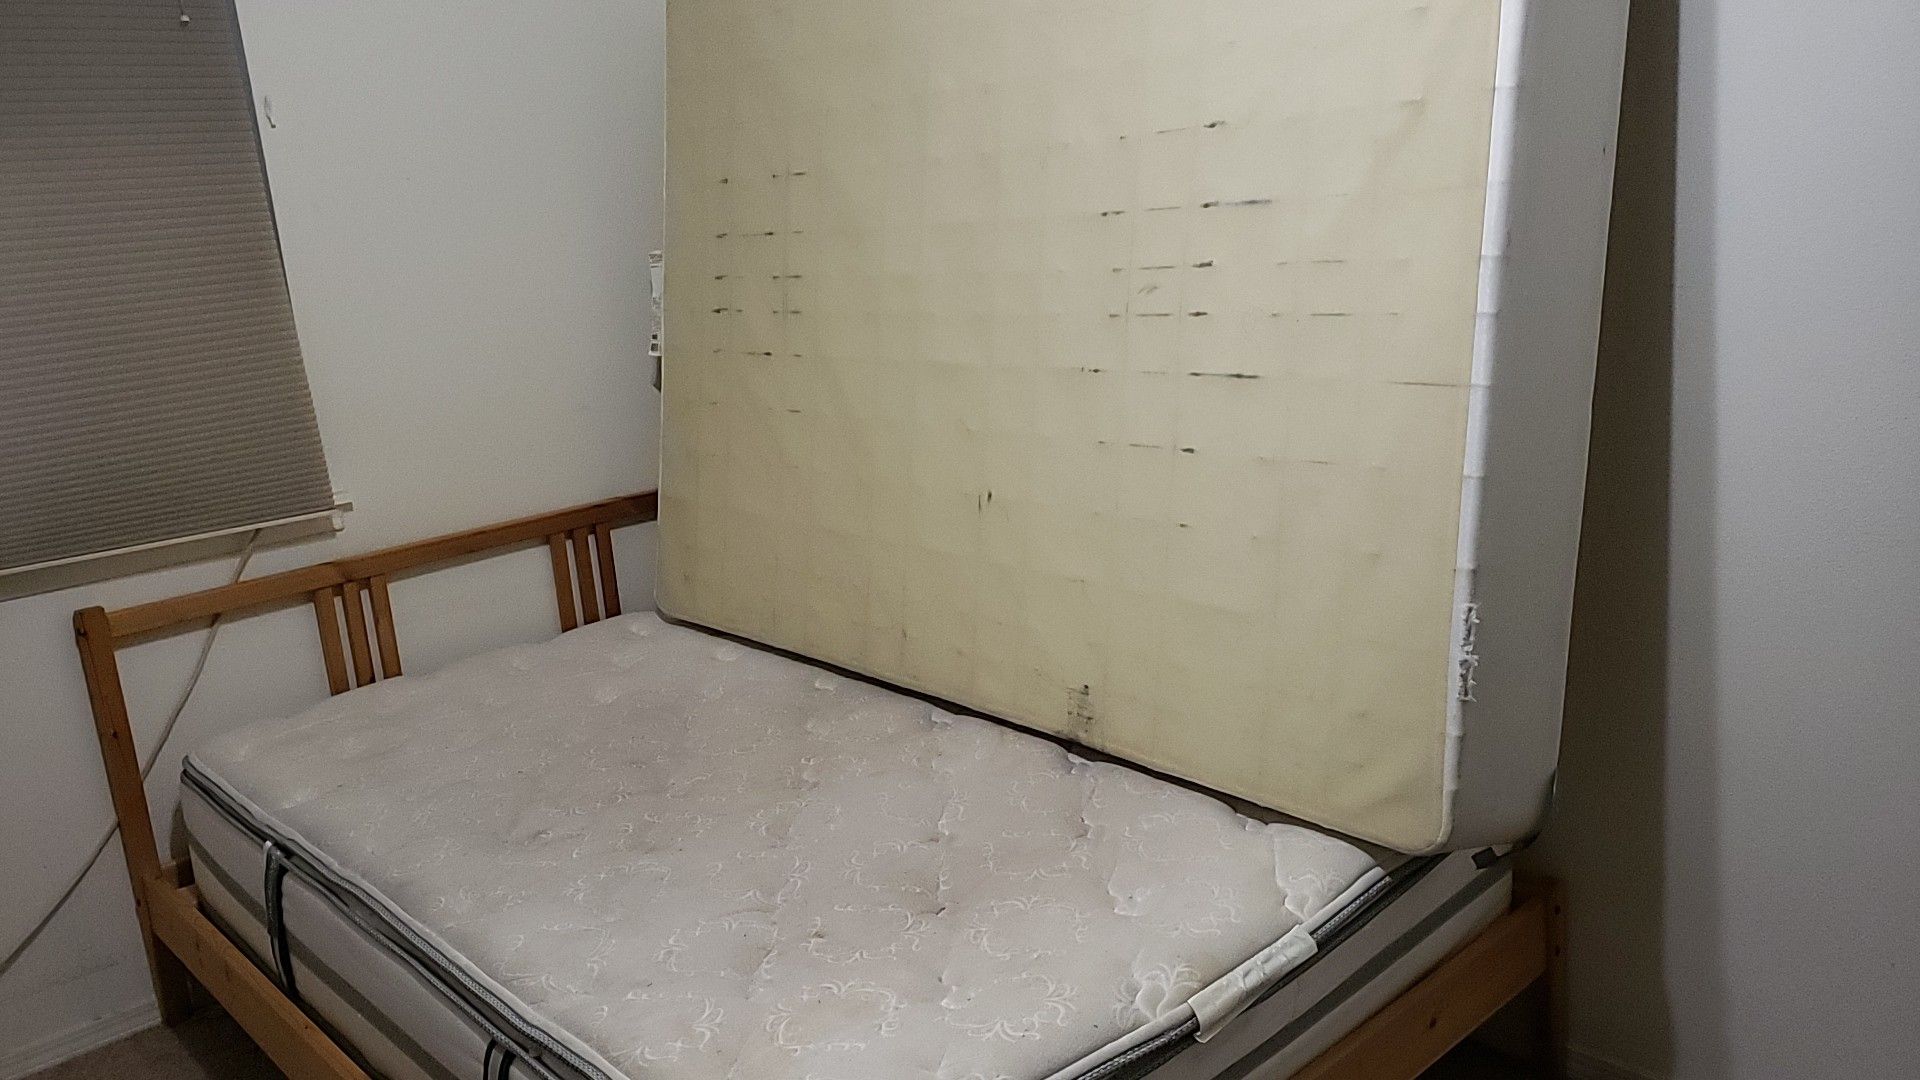 Full size mattress with base box and wodden FULL size frame . Also have bed frame for a QUEEN mattress - FREE